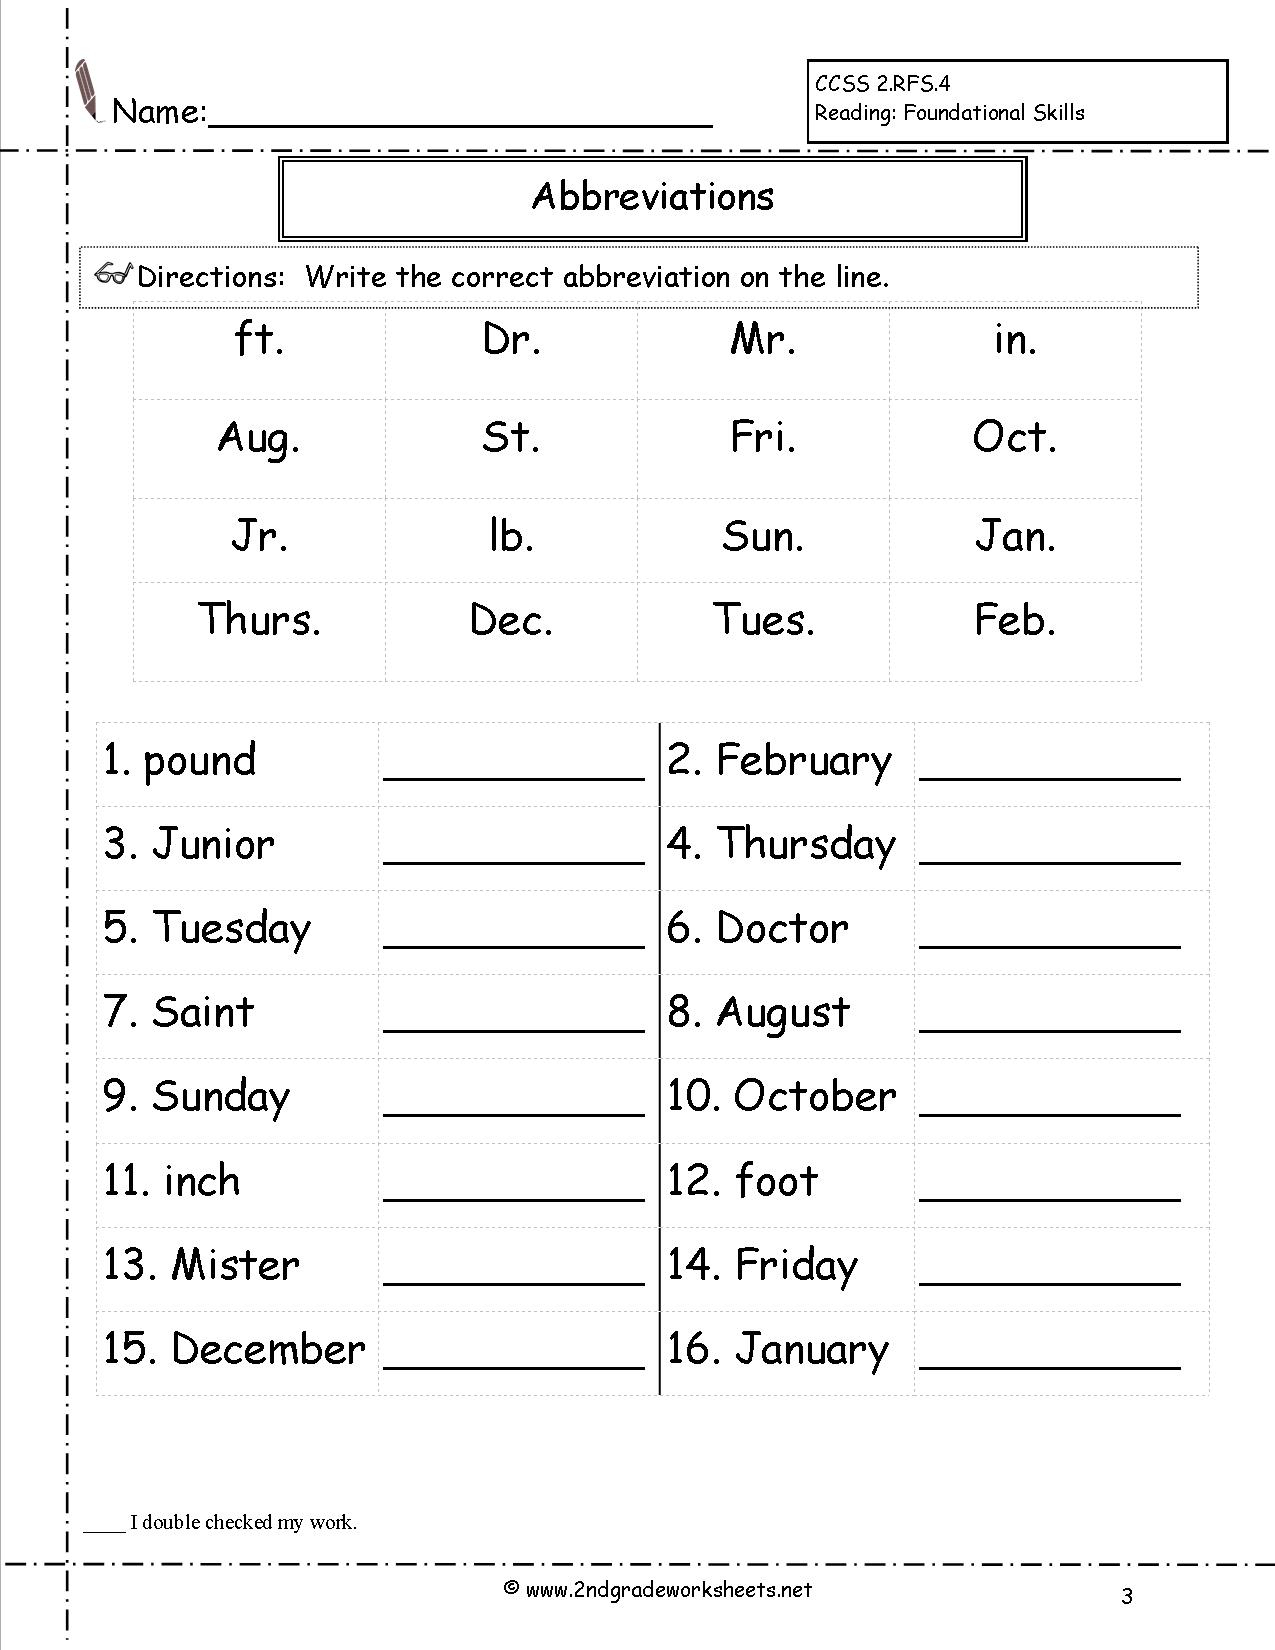 Free Abbreviation Worksheets And Printouts - Free Printable Reading Games For 2Nd Graders